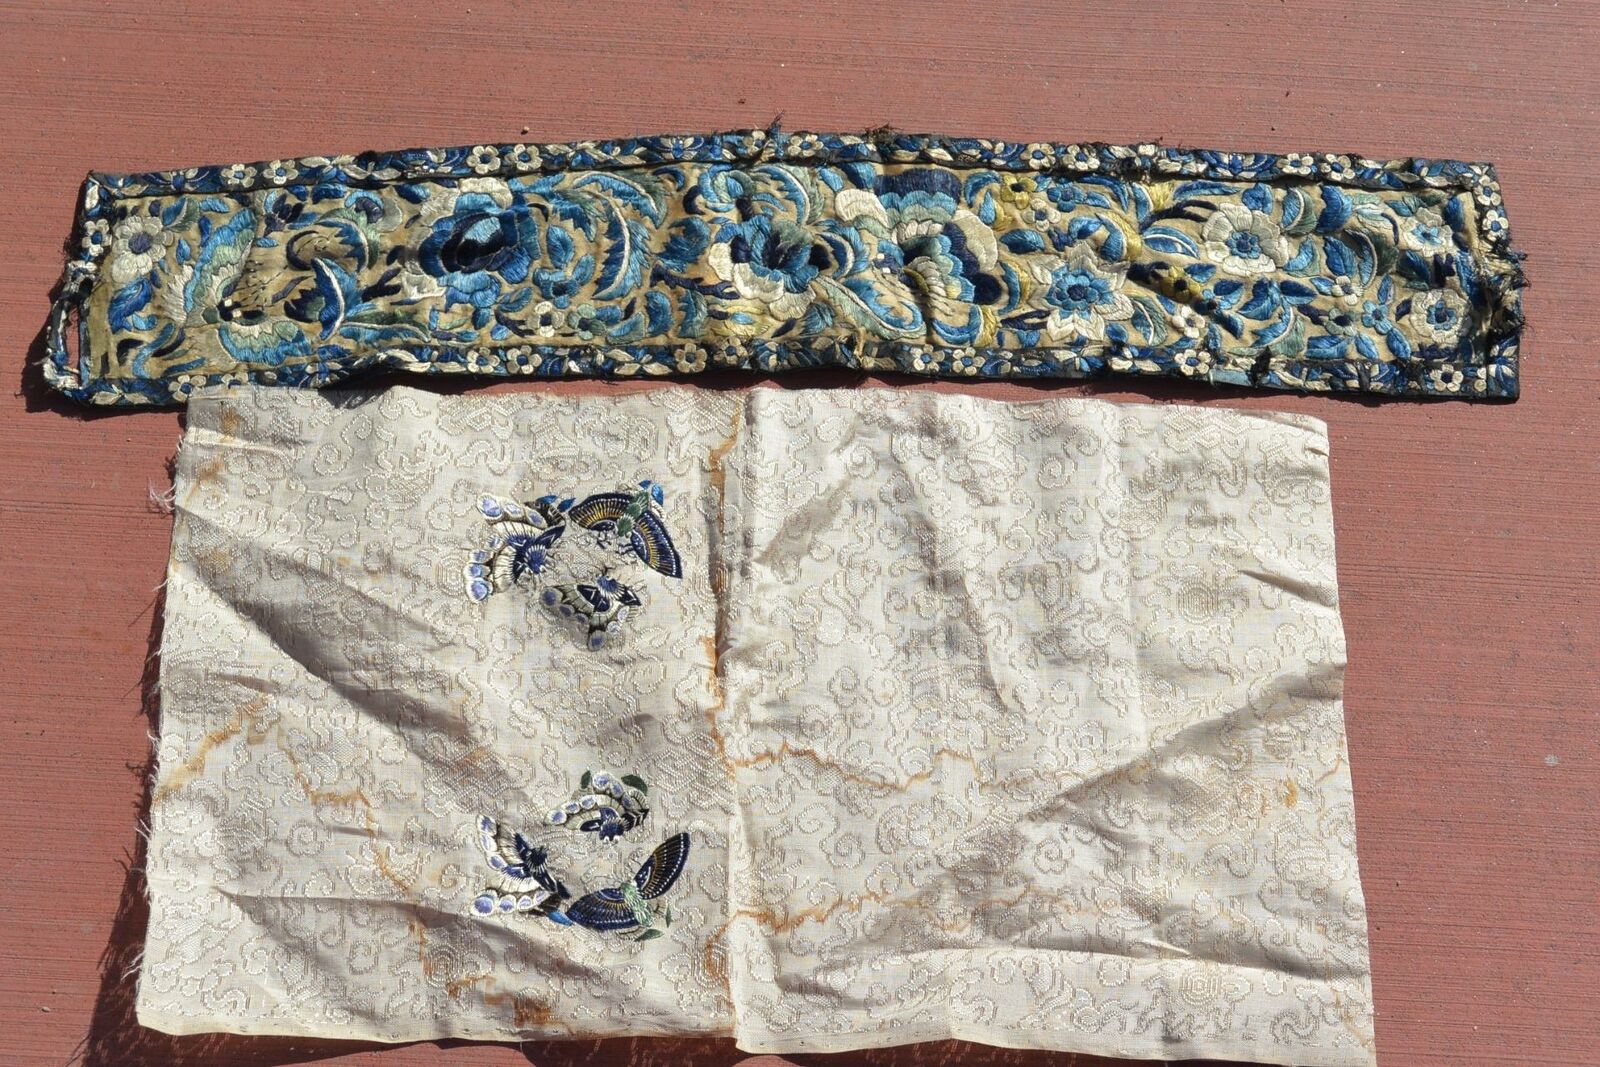 2 Late 19c Chinese Silk Embroidery Textile Panel Robe Sleeves Band Parts